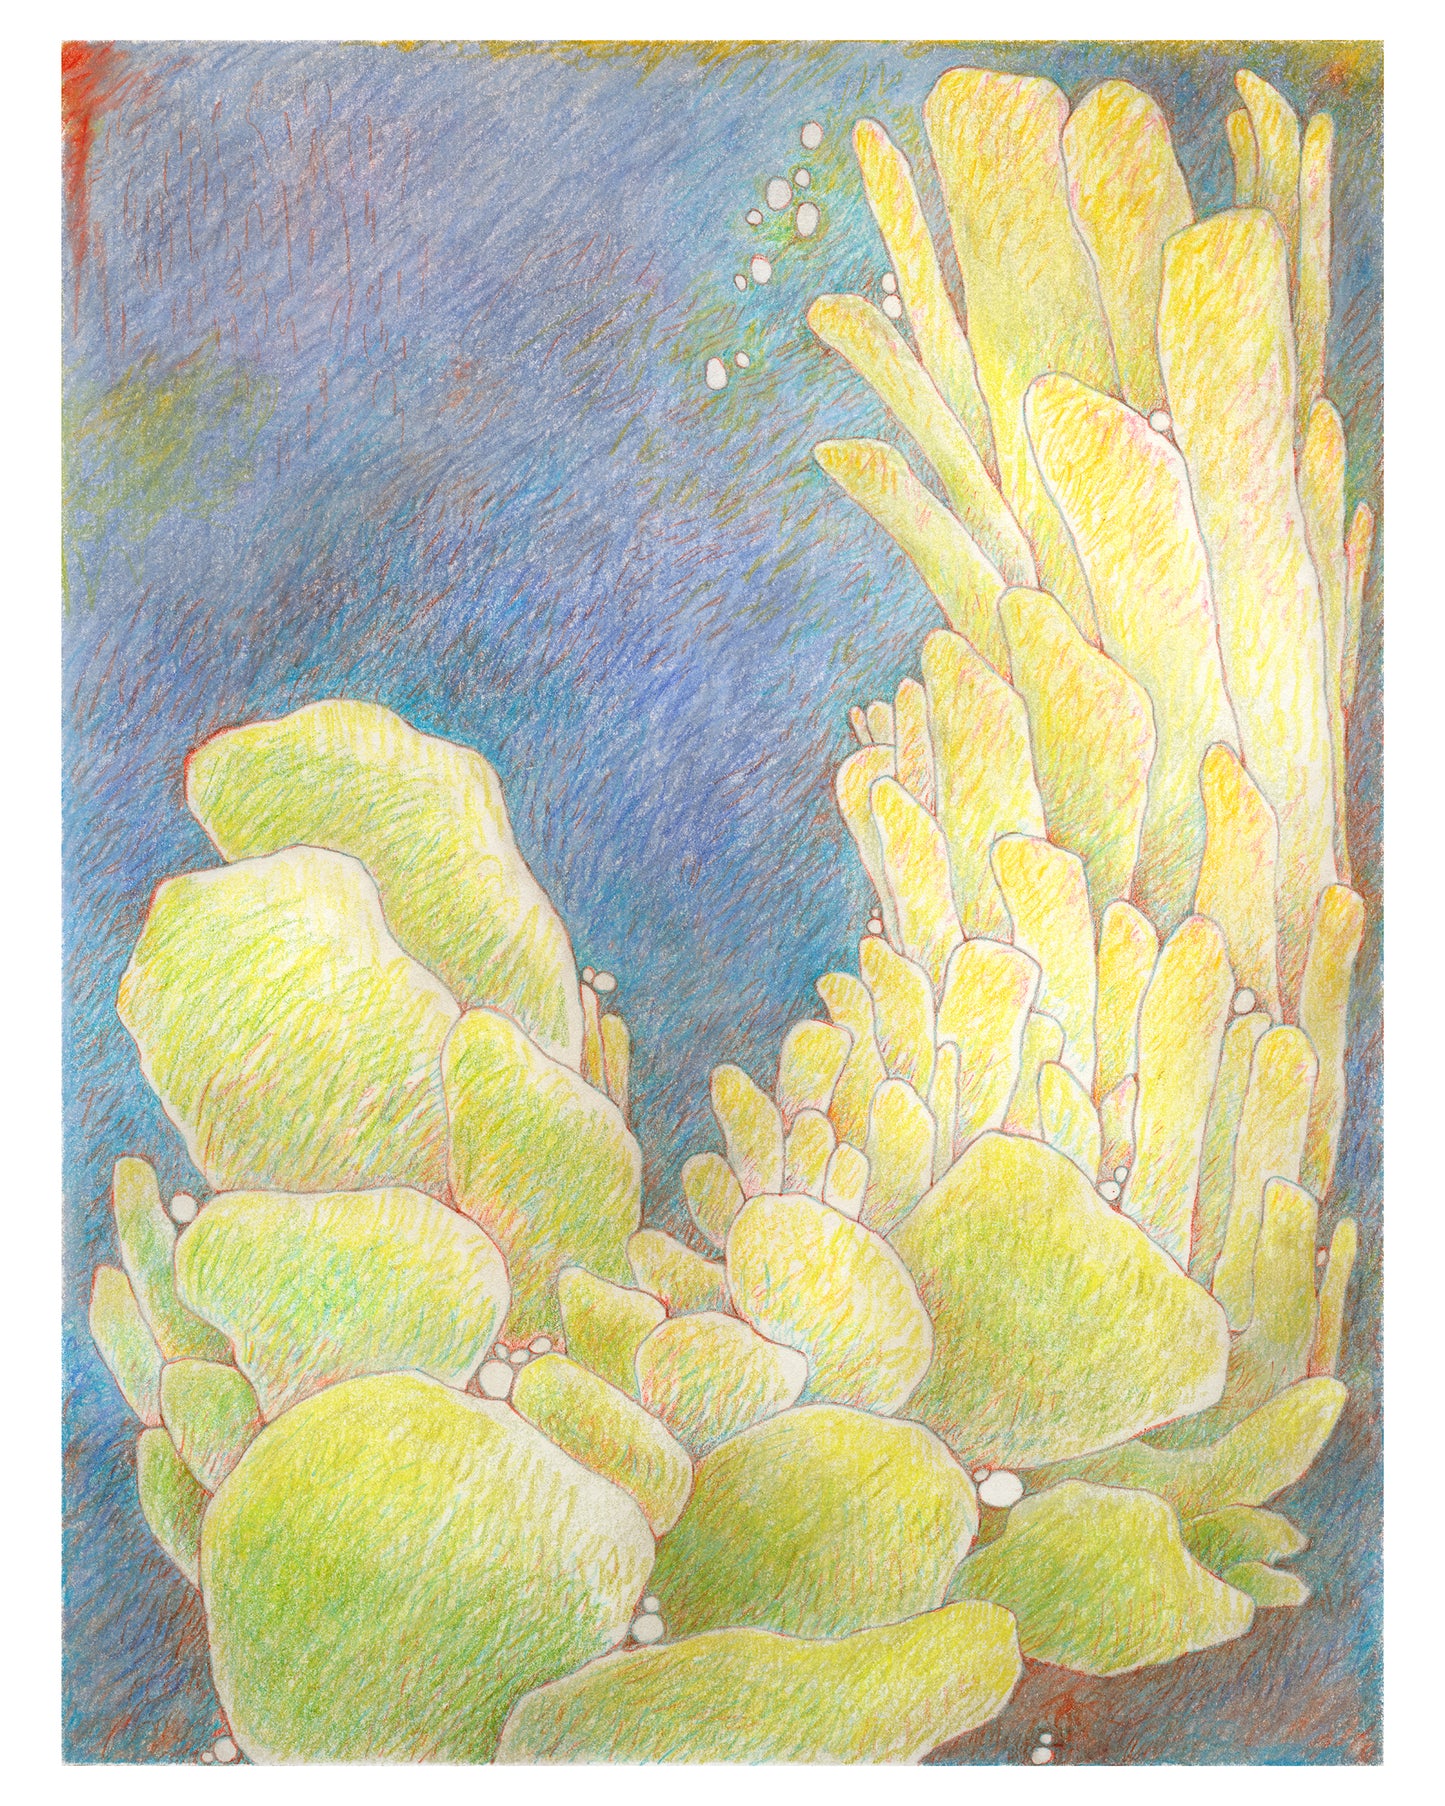 Surreal colored pencil drawing of cactus on a dark background.